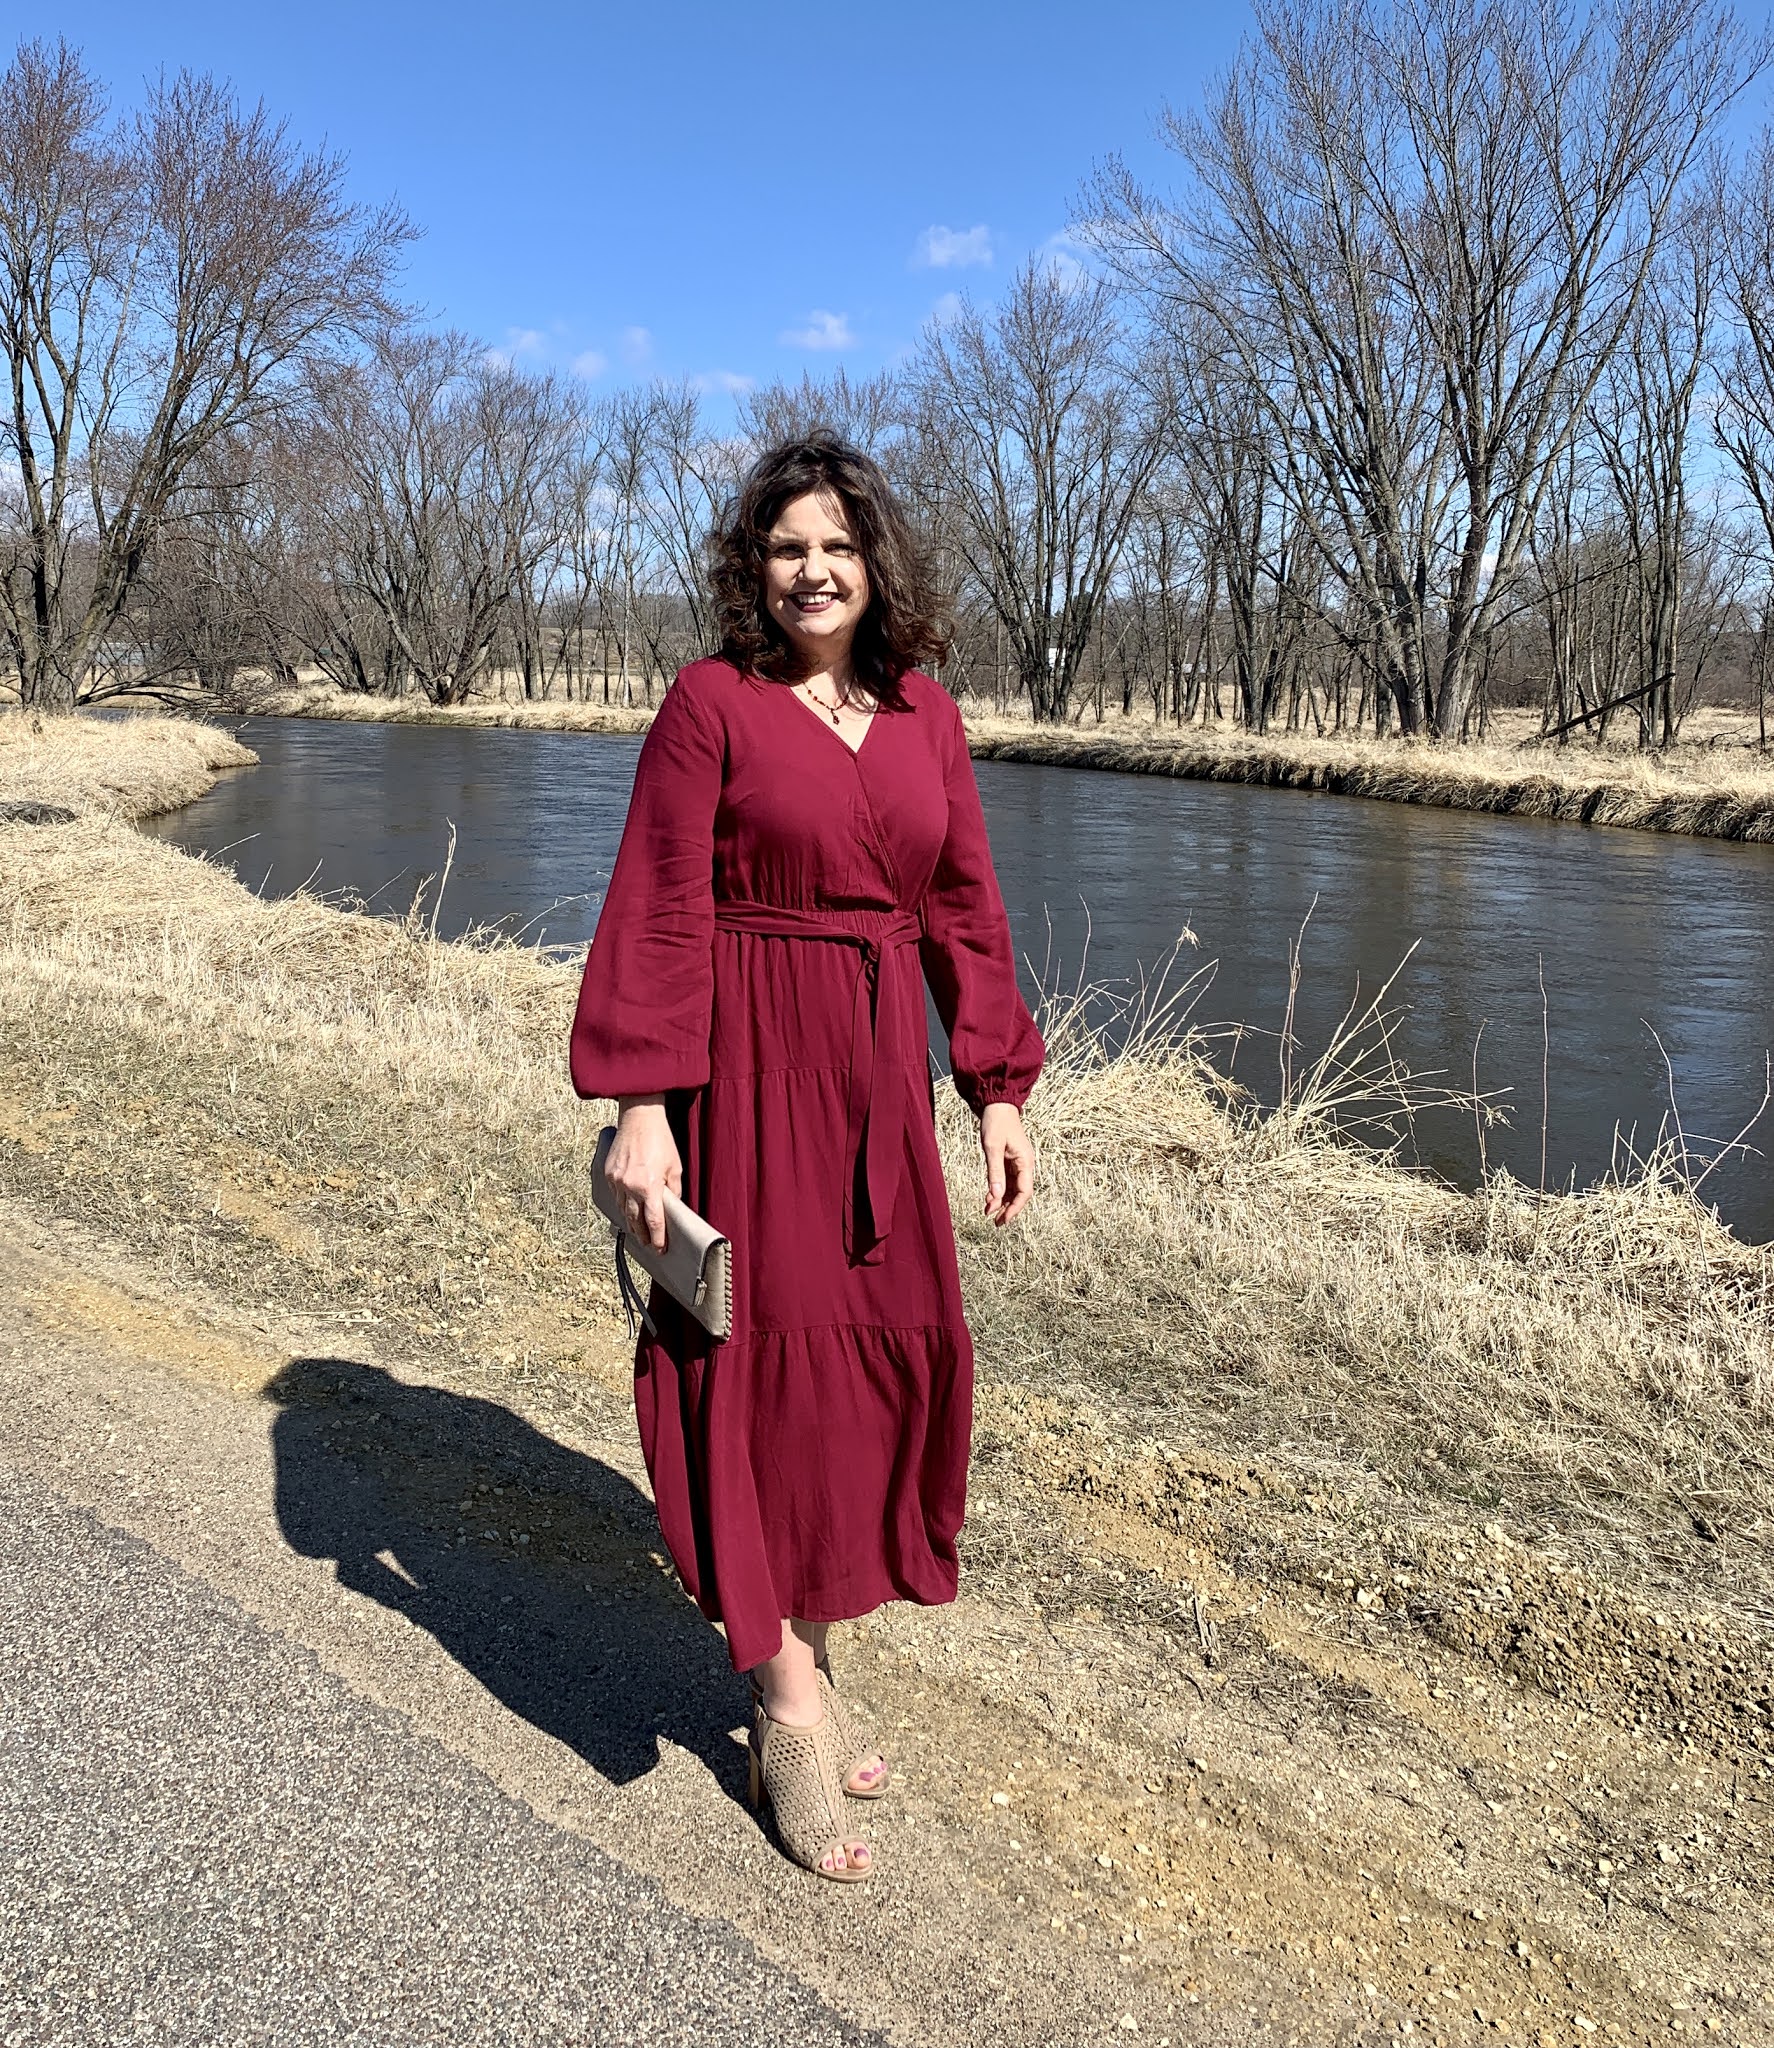 Amy's Creative Pursuits: Ageless Style - Earth Tones